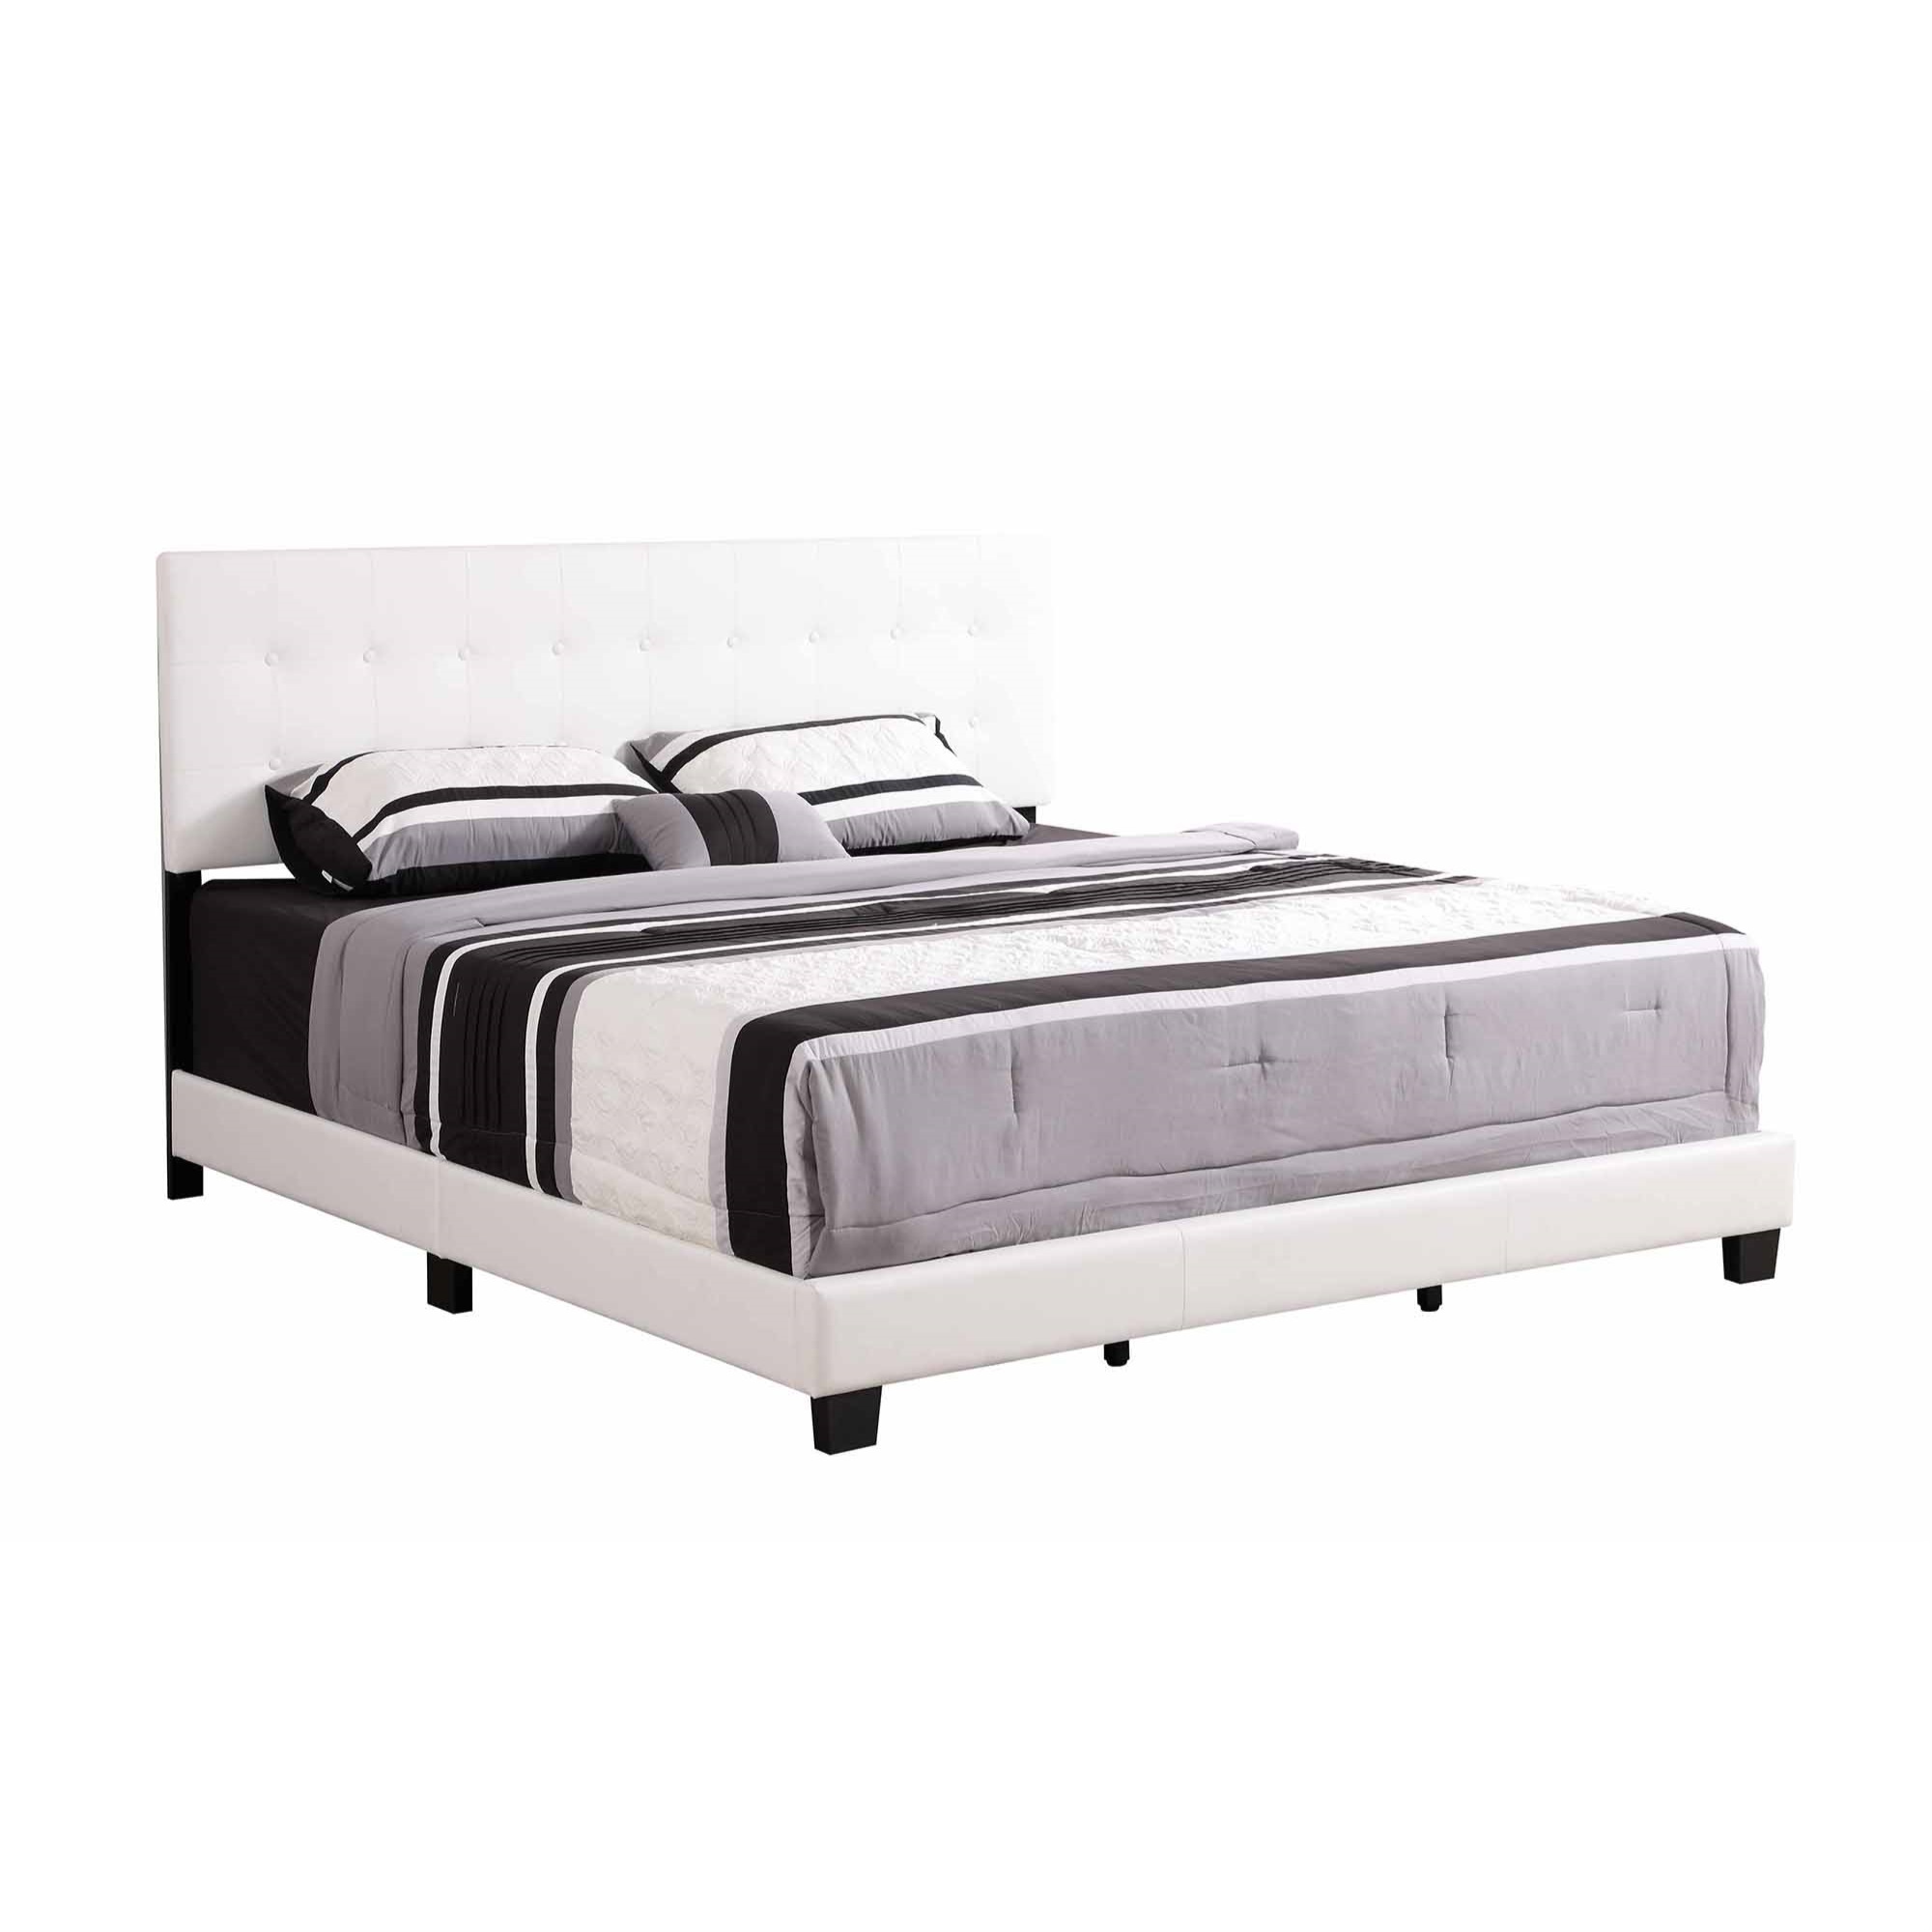 Passion Furniture  Caldwell Faux Leather Button Tufted Panel Bed, White - King Size - image 1 of 5